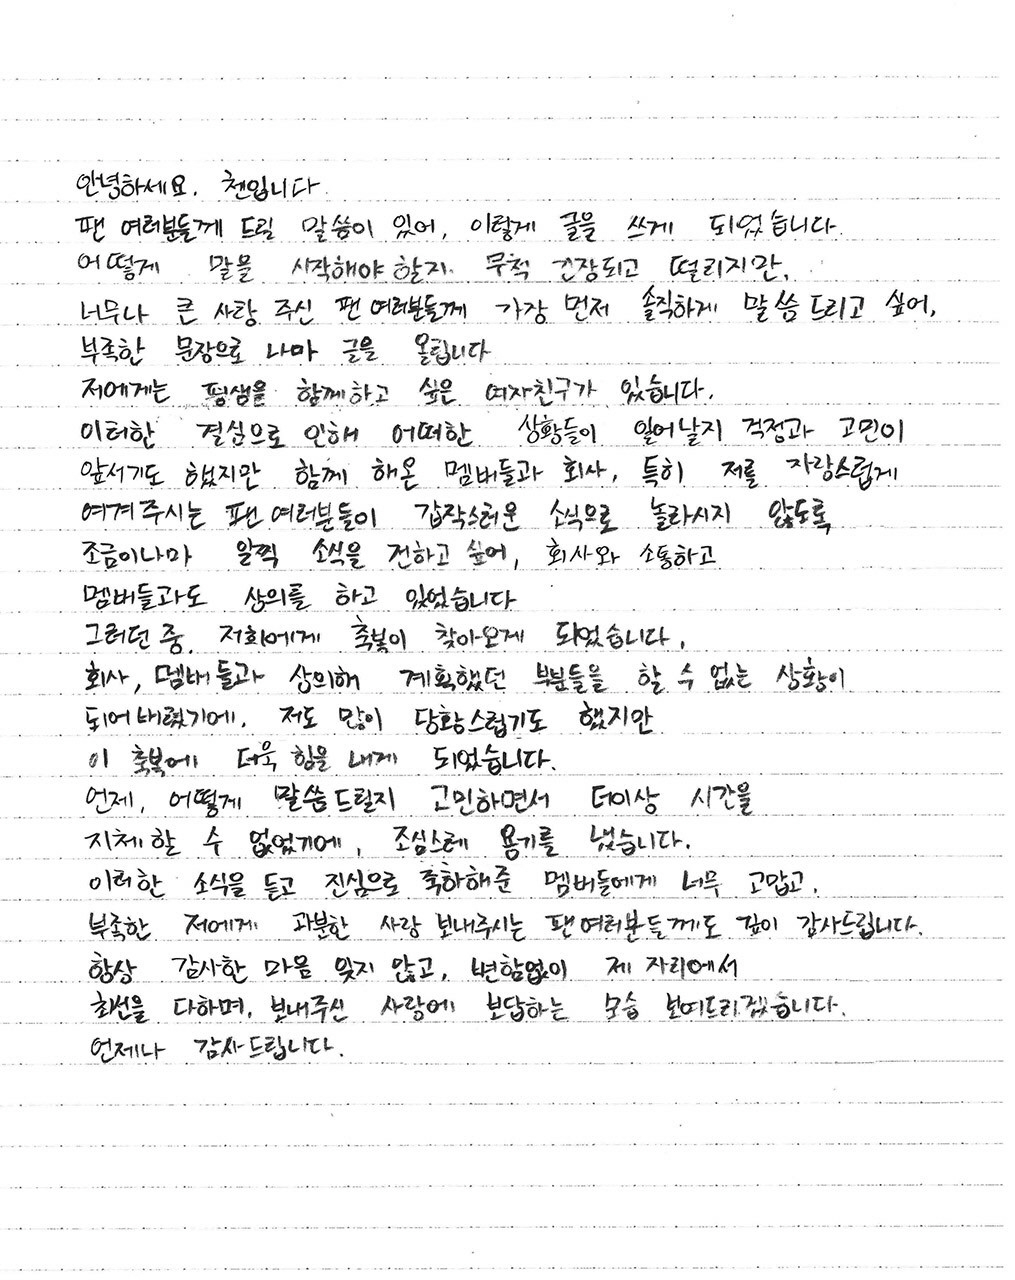 Group EXO No.1 Married was born; Chen (real name Kim Jong-dae) announced his marriage with courage.Many people cheered and Blessing in the surprise announcement while the news of the second generation was also conveyed.Chen posted a letter on the official fan club community Lysn on the 13th, saying, I was nervous and nervous, but I wanted to be the first to tell you honestly.I have a GFriend who wants to be with me for the rest of my life, Chen said frankly.This decision would have led to worry and worry about what was going to happen. Chen wanted to communicate with the company and consult with the members a little early so that the fans would not be surprised by the sudden news.Then a new life, Blessing, came to him. Chen said, I was very embarrassed, but I was more encouraged by this Blessing.Chen expressed his gratitude to EXO members who congratulated him sincerely.In particular, Chen promised his fans, I am grateful for the love that I have been lacking, and promised, I will always show you my gratitude, my best efforts in my place, and my reward for the love I have sent.According to his agency SM Entertainment, the bride is a non-entertainer, and the marriage ceremony is planned to be held reverently by only the families of both families.In addition, according to the will of the family, all matters related to marriage and marriage are conducted privately.SM said, Chen will continue to work hard as an artist in the future, he said. I would like to ask Chen to celebrate with a lot of bessing.This makes Chen the first of the EXO members to become Married.Chen made his debut as an EXO member in 2012, and has been active in group, unit, and solo based on his cool singing ability as the main vocalist in the team.Starting with the drama Its okay, Im in love, I called a number of drama OSTs such as Dawn of the Sun and One Hundred Days.In April of last year, he released his first solo album April, and Flower in his debut seven years. In October, he released his mini-second album To You Love and made sure that he was a vocalist.Hi, Im ChenI have something to tell you fans, so I wrote this.Im very nervous and nervous about how to start talking,I want to be the first to tell you fans who have given me so much loveI post it in a short sentence.I have a GFriend who wants to spend my whole life together.I was worried and worried about what would happen due to this decision,The members and the company that have been together, especially the fans who are proud of meId like to get word out a little early so you dont get surprised by the sudden news,I was communicating with the company and consulting with members.Then Blessing came to me.I can not do the parts I planned with the company and the members.I was very embarrassed, tooIve become more powerful in this Blessing.I could not delay the time anymore while thinking about when and how to tell youI was very careful.I am so grateful to the members who have sincerely congratulated me on hearing this newsI am deeply grateful to all the fans who send me love for me.I always do my best in my place, without forgetting my gratitude,Ill show you how to repay the love you sent me.Thank you always.